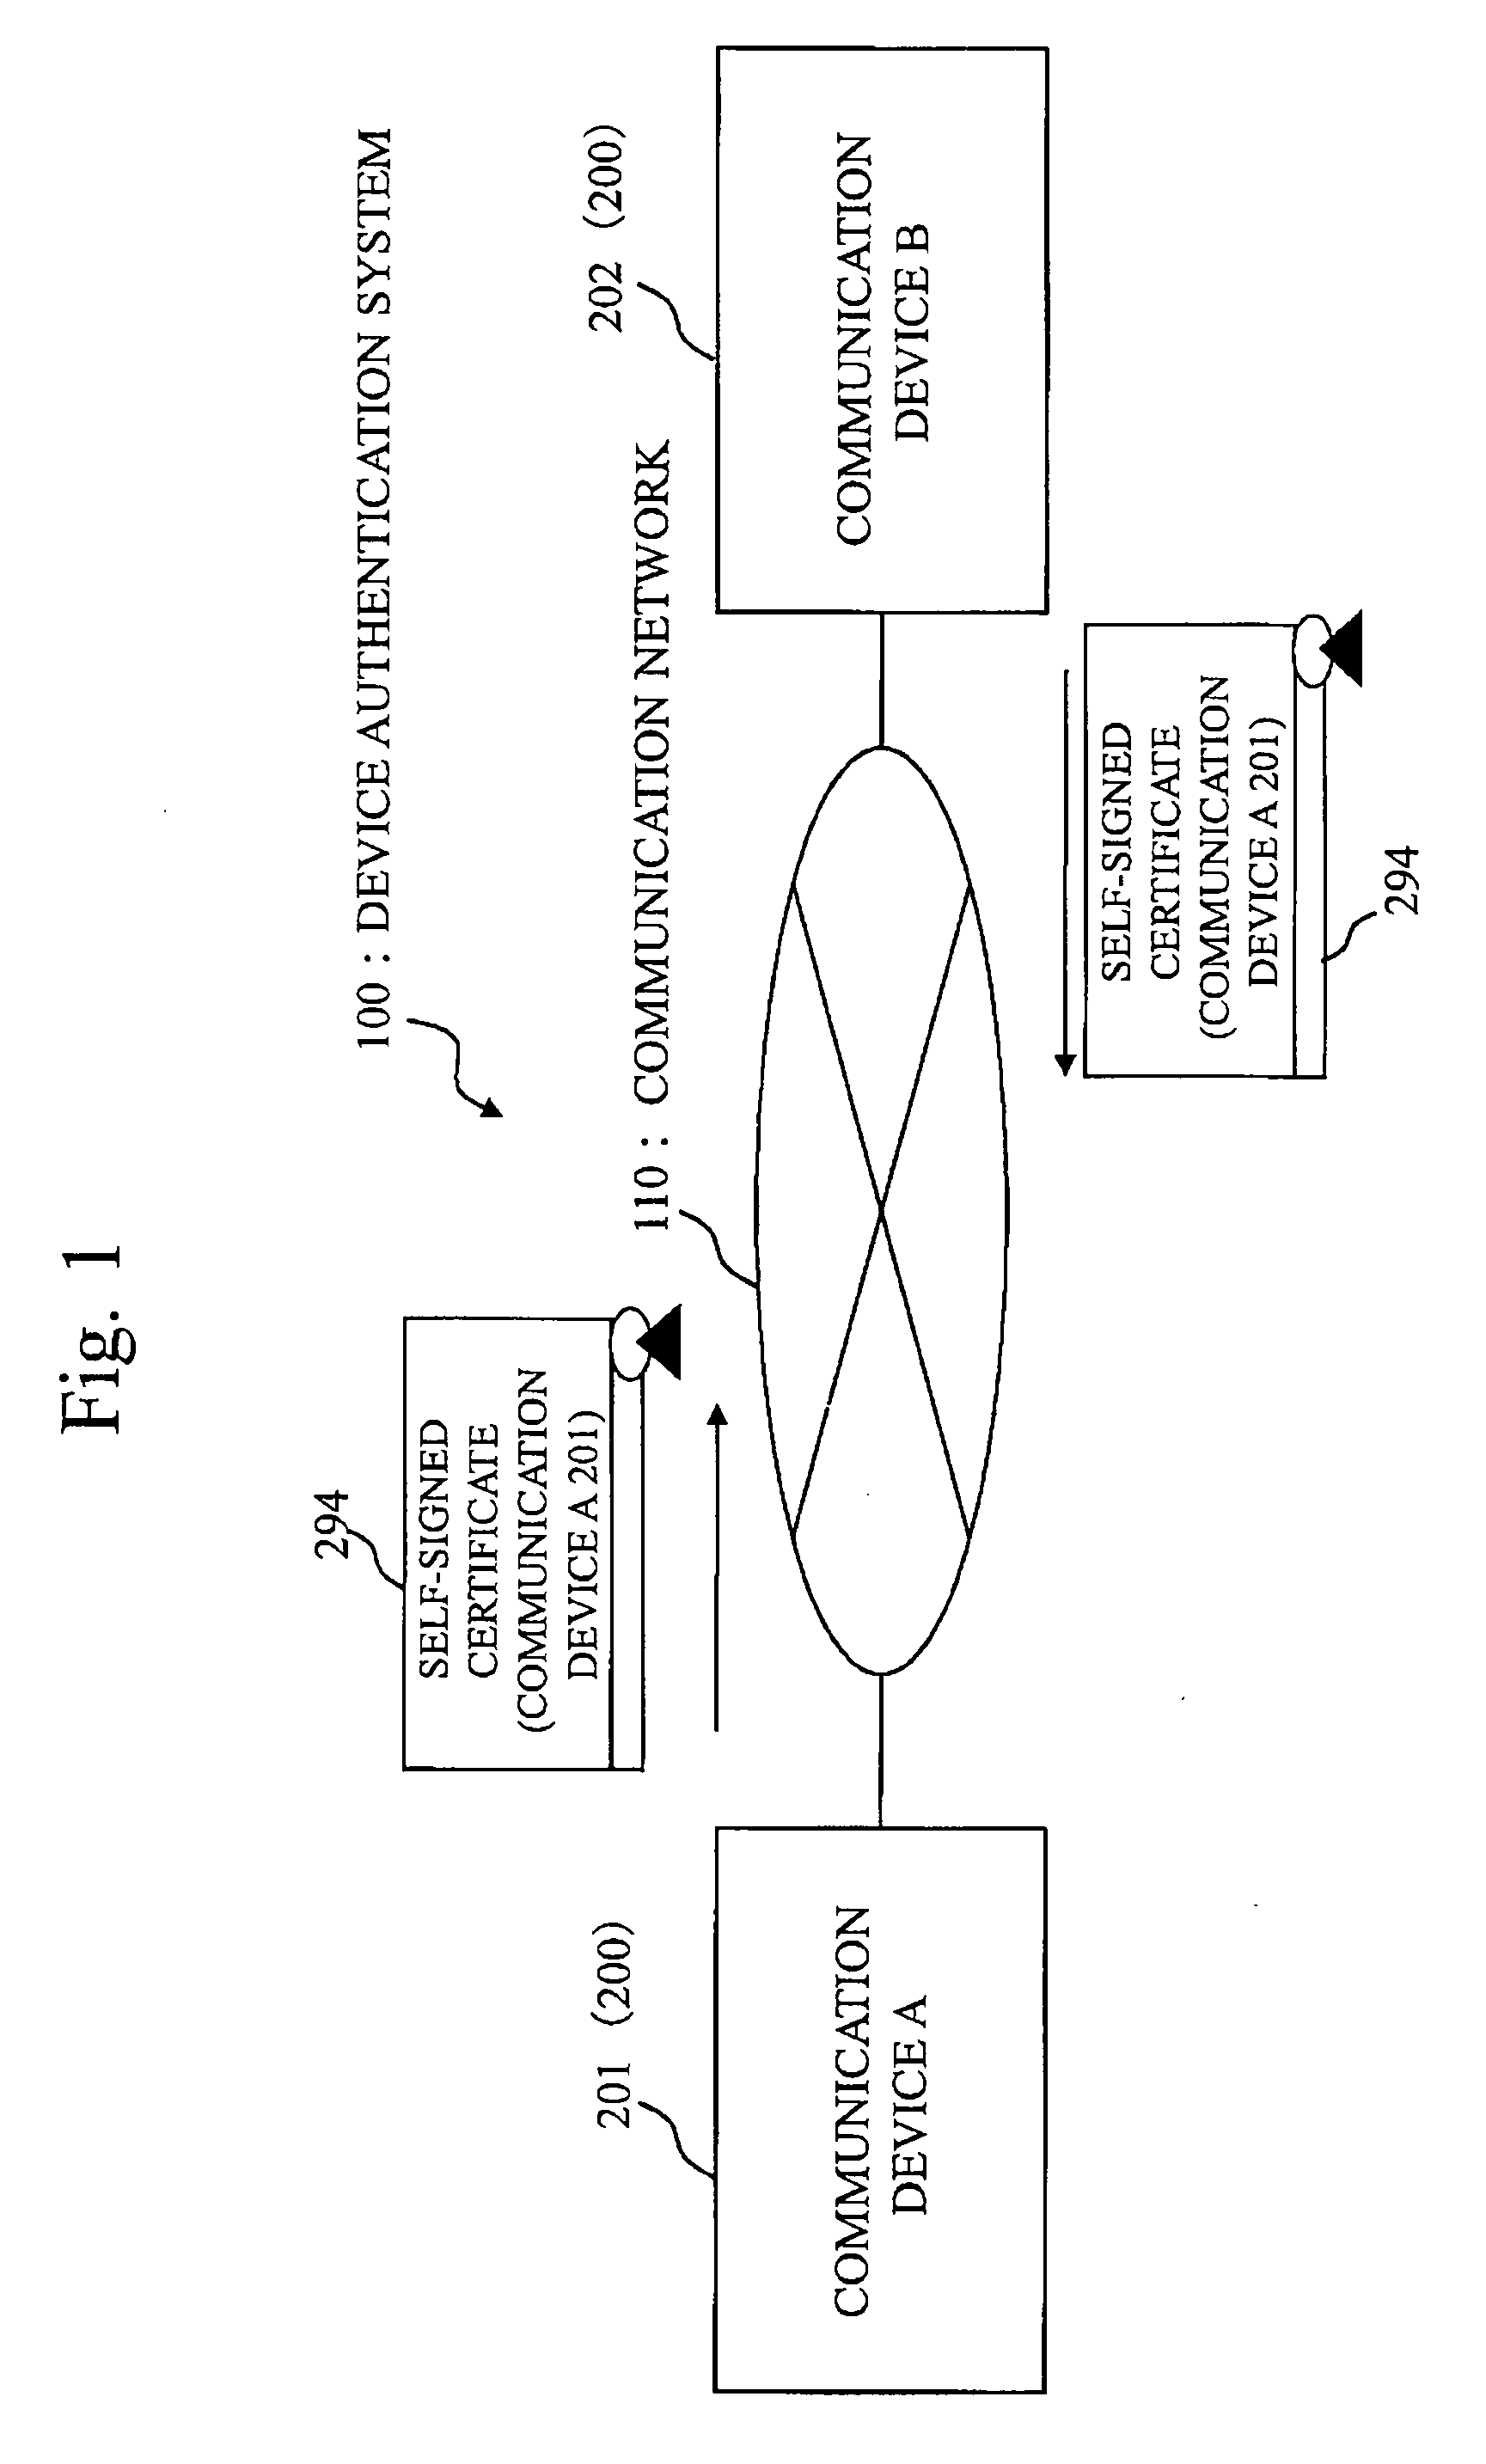 Self-authentication communication device and device authentication system